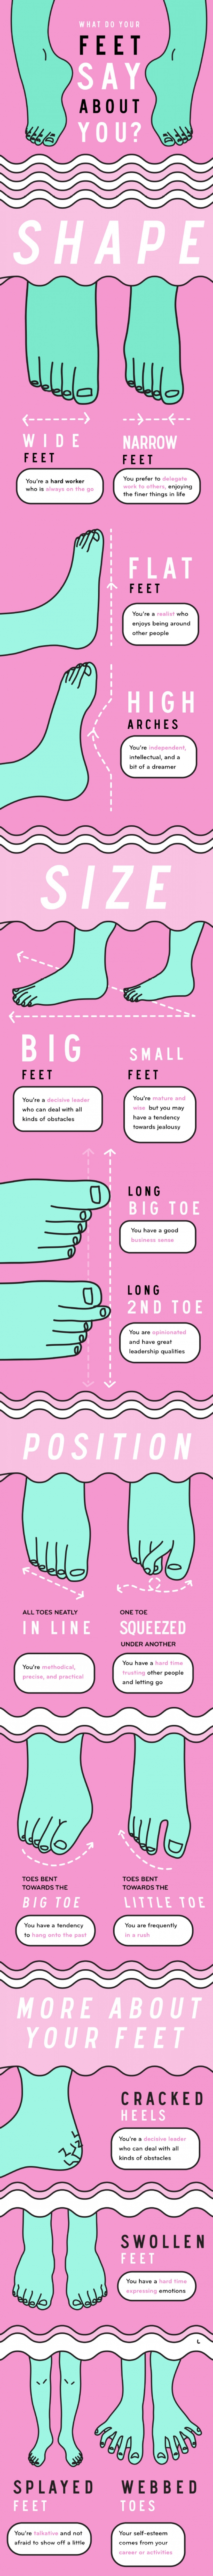 What Do Your Feet Say About You?